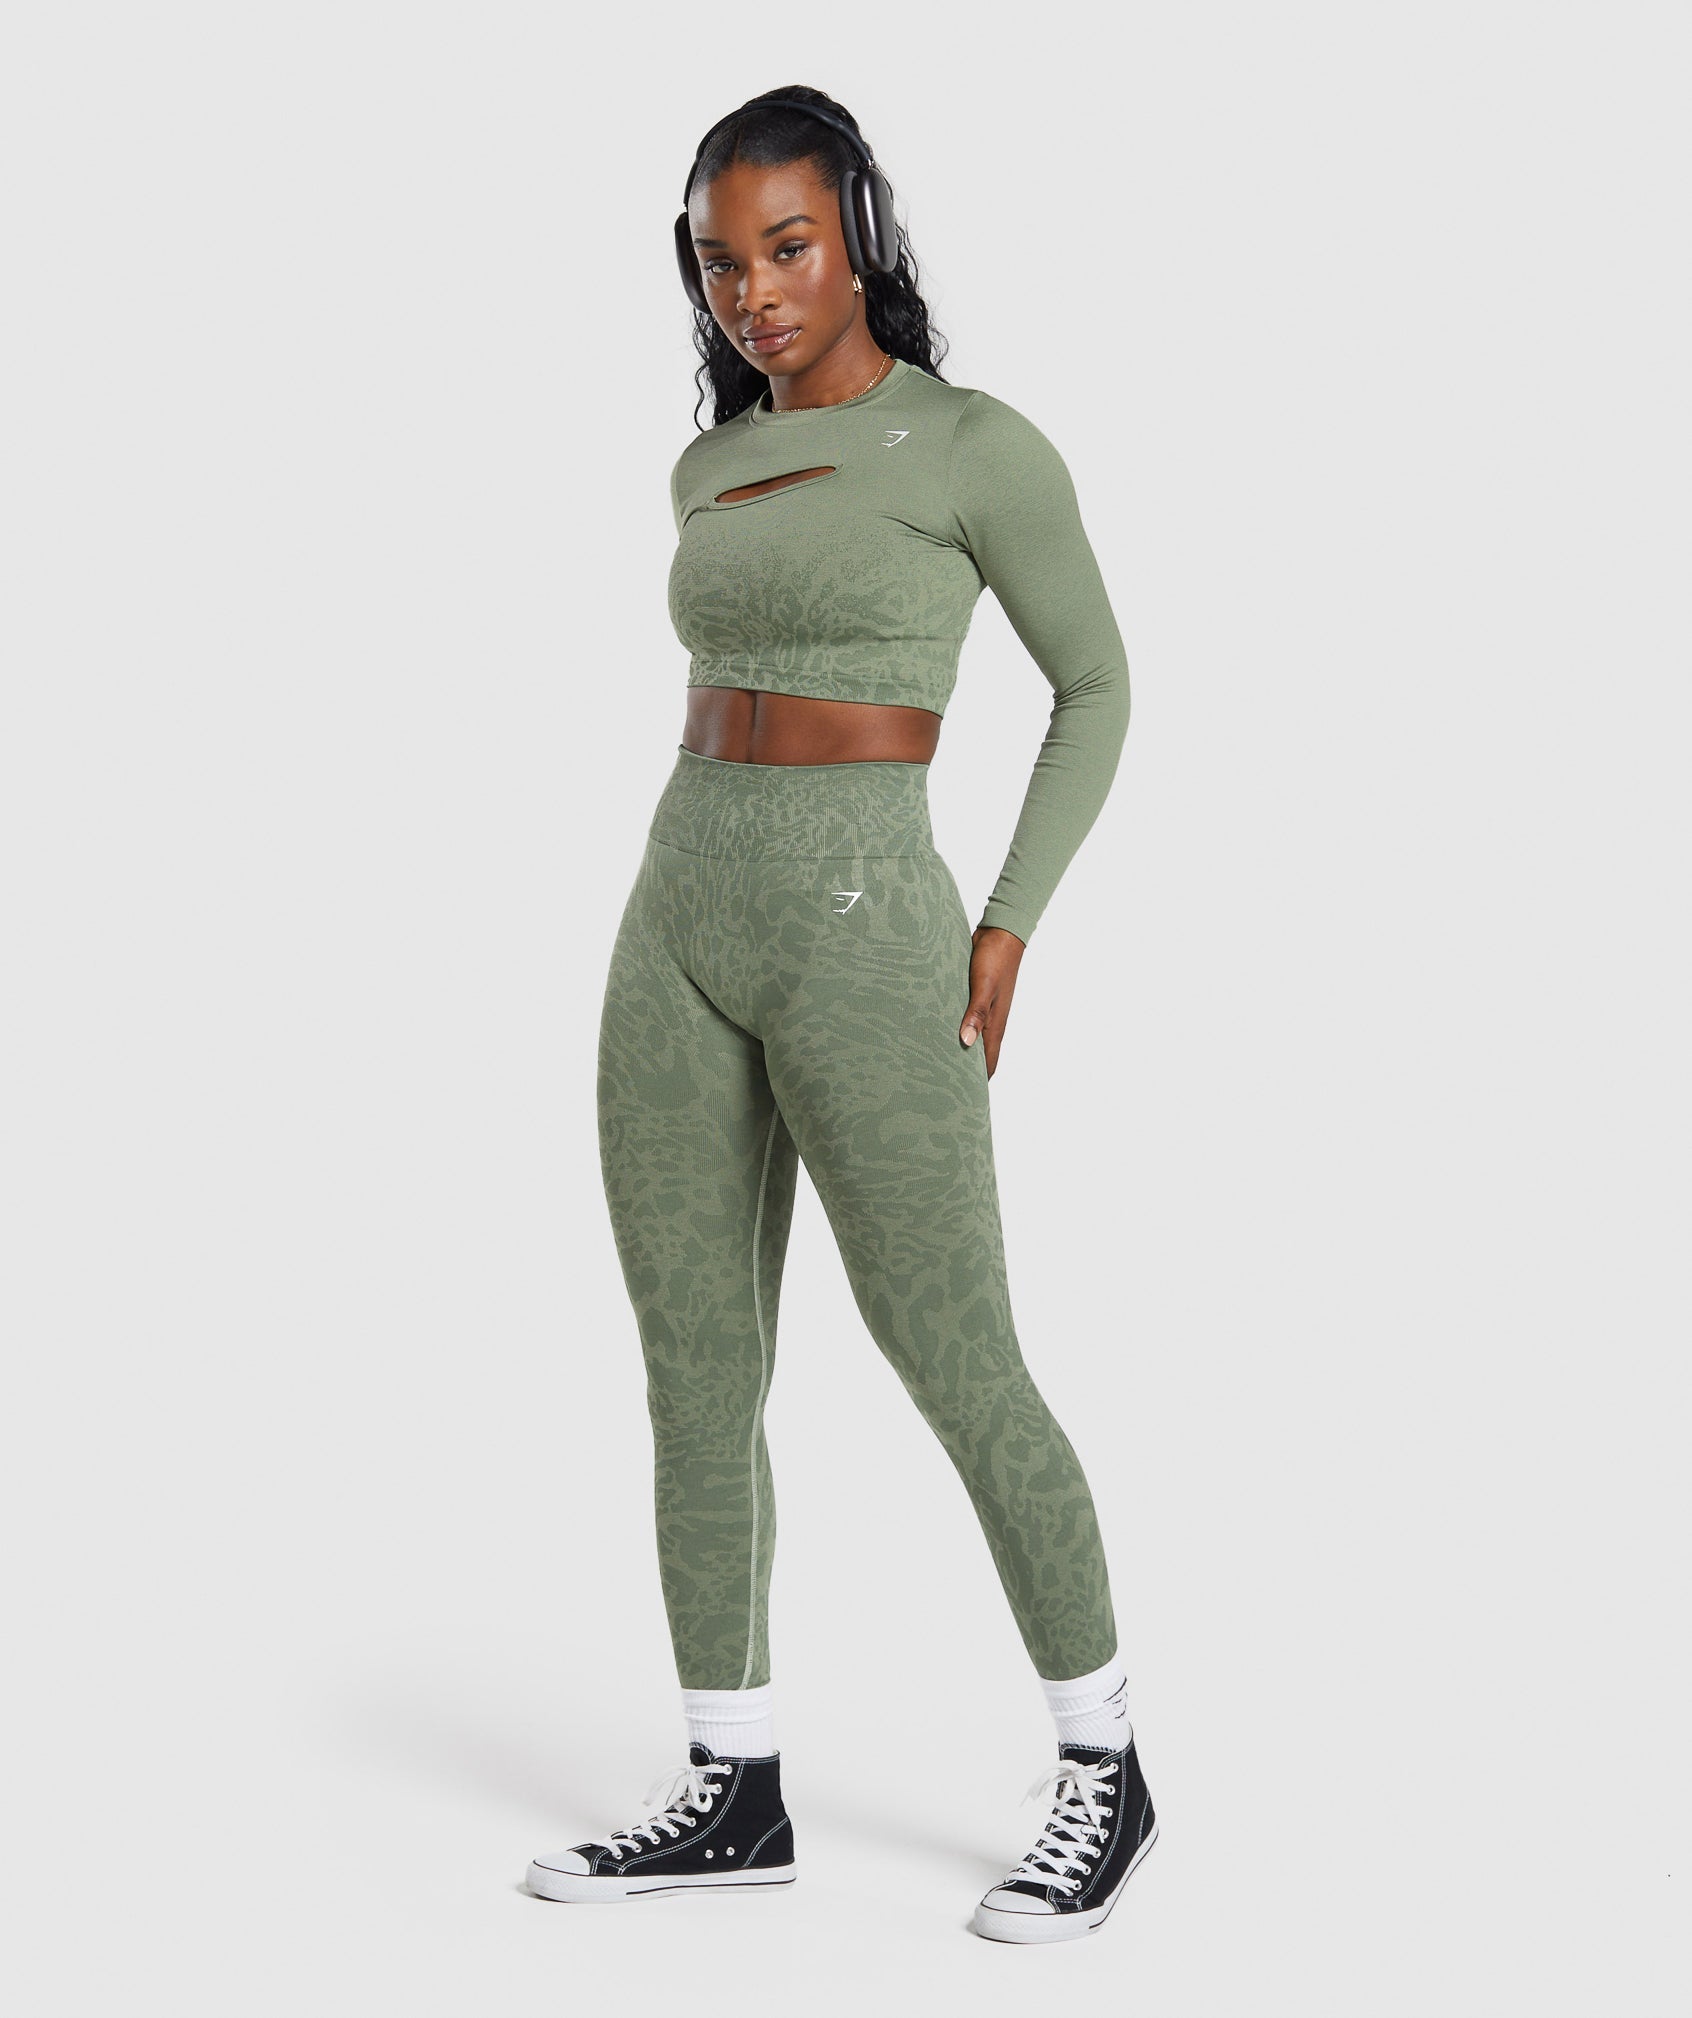 Long Sleeve Burnout Seamless Set Gymshark DUPES 2 Piece Gym Sets - Wom –  Mommin' Out & More